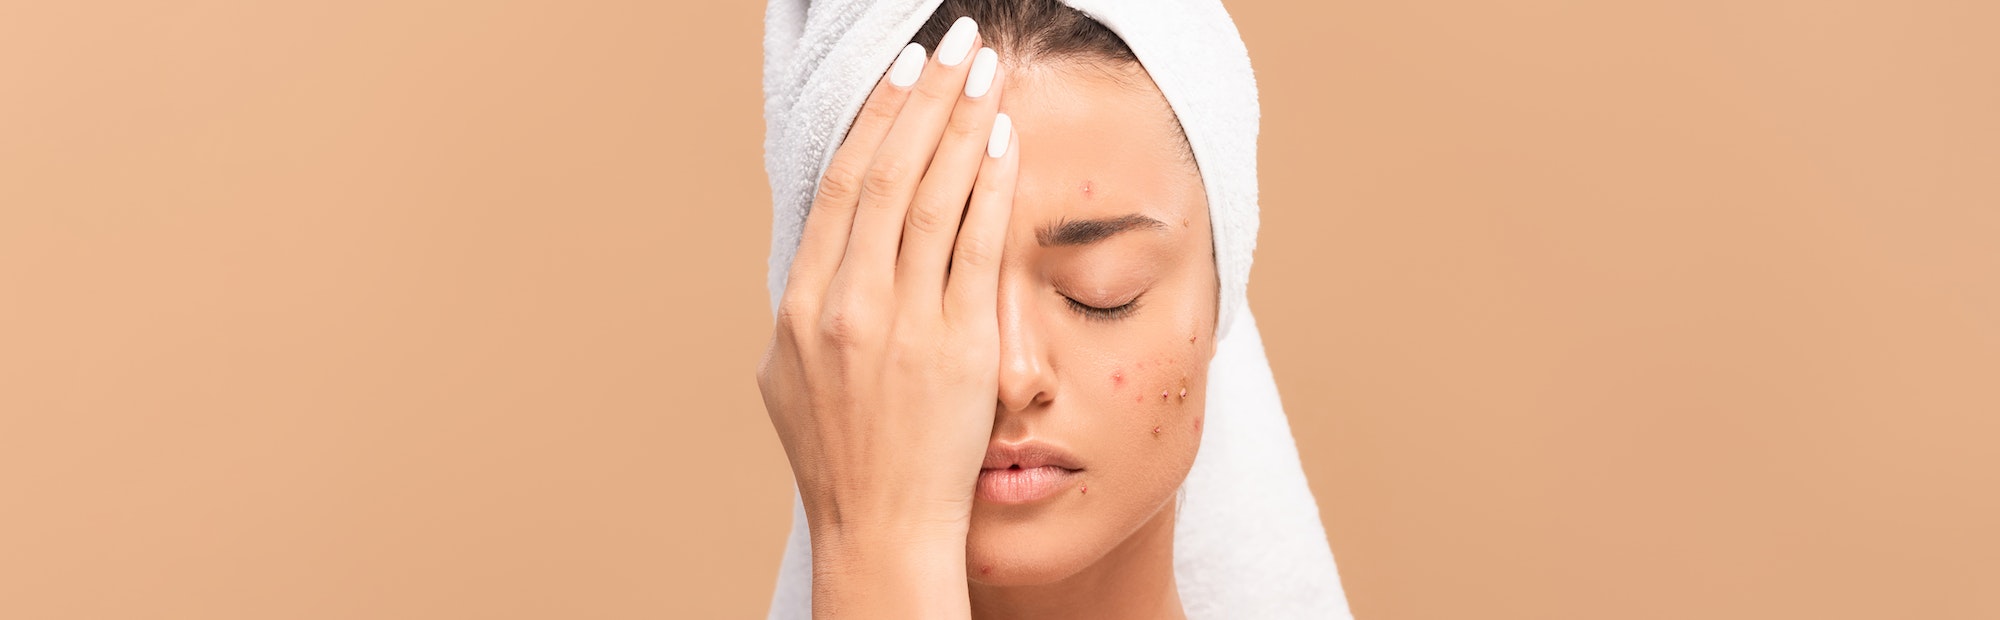 panoramic shot of girl with acne covering face isolated on beige